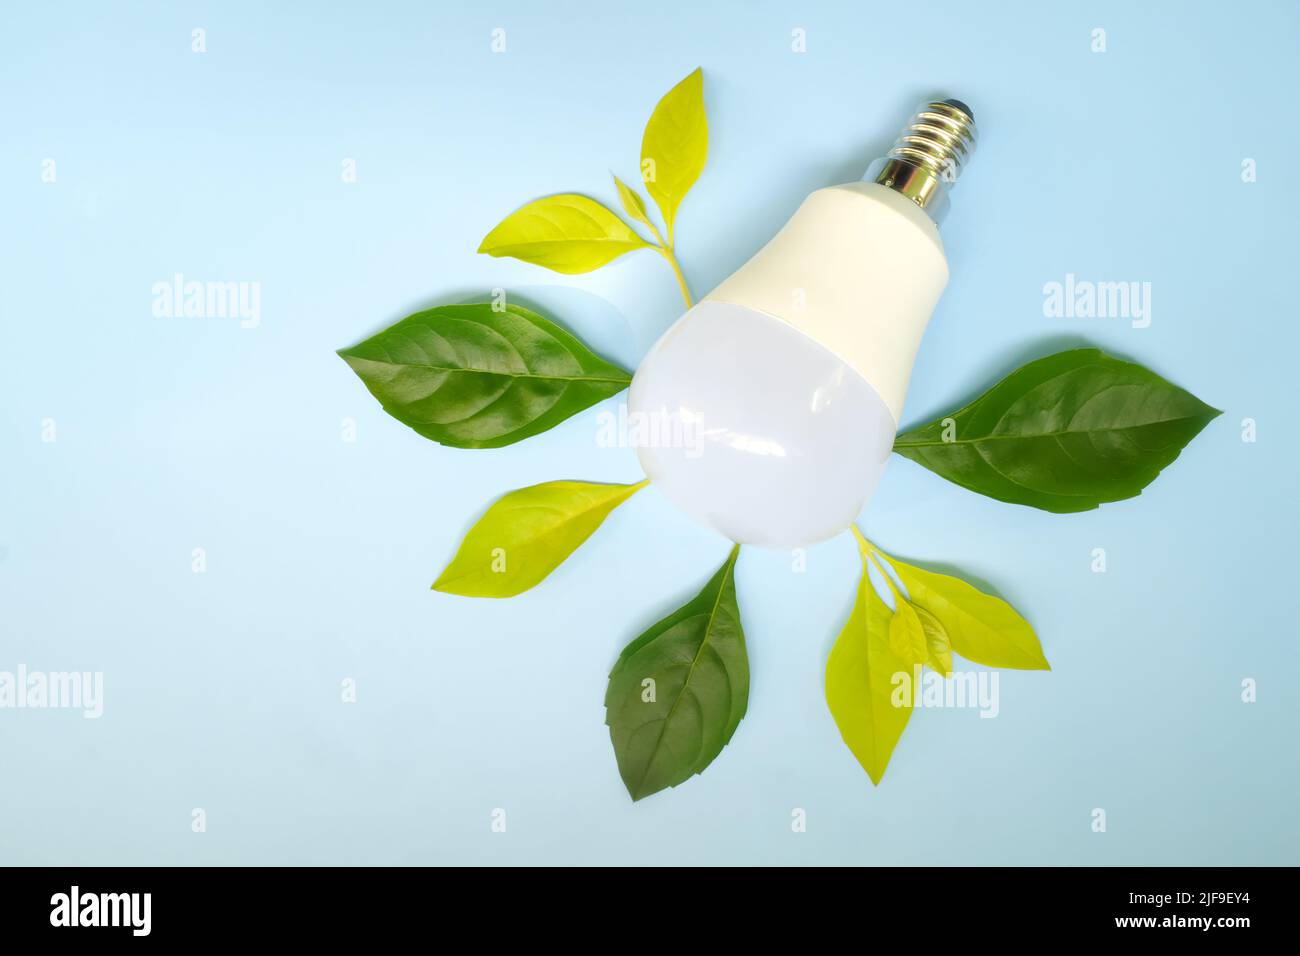 Save electricity, lights off, idea and innovation environmental conservation concept. Light bulb with fresh green leaves flat lay. Stock Photo